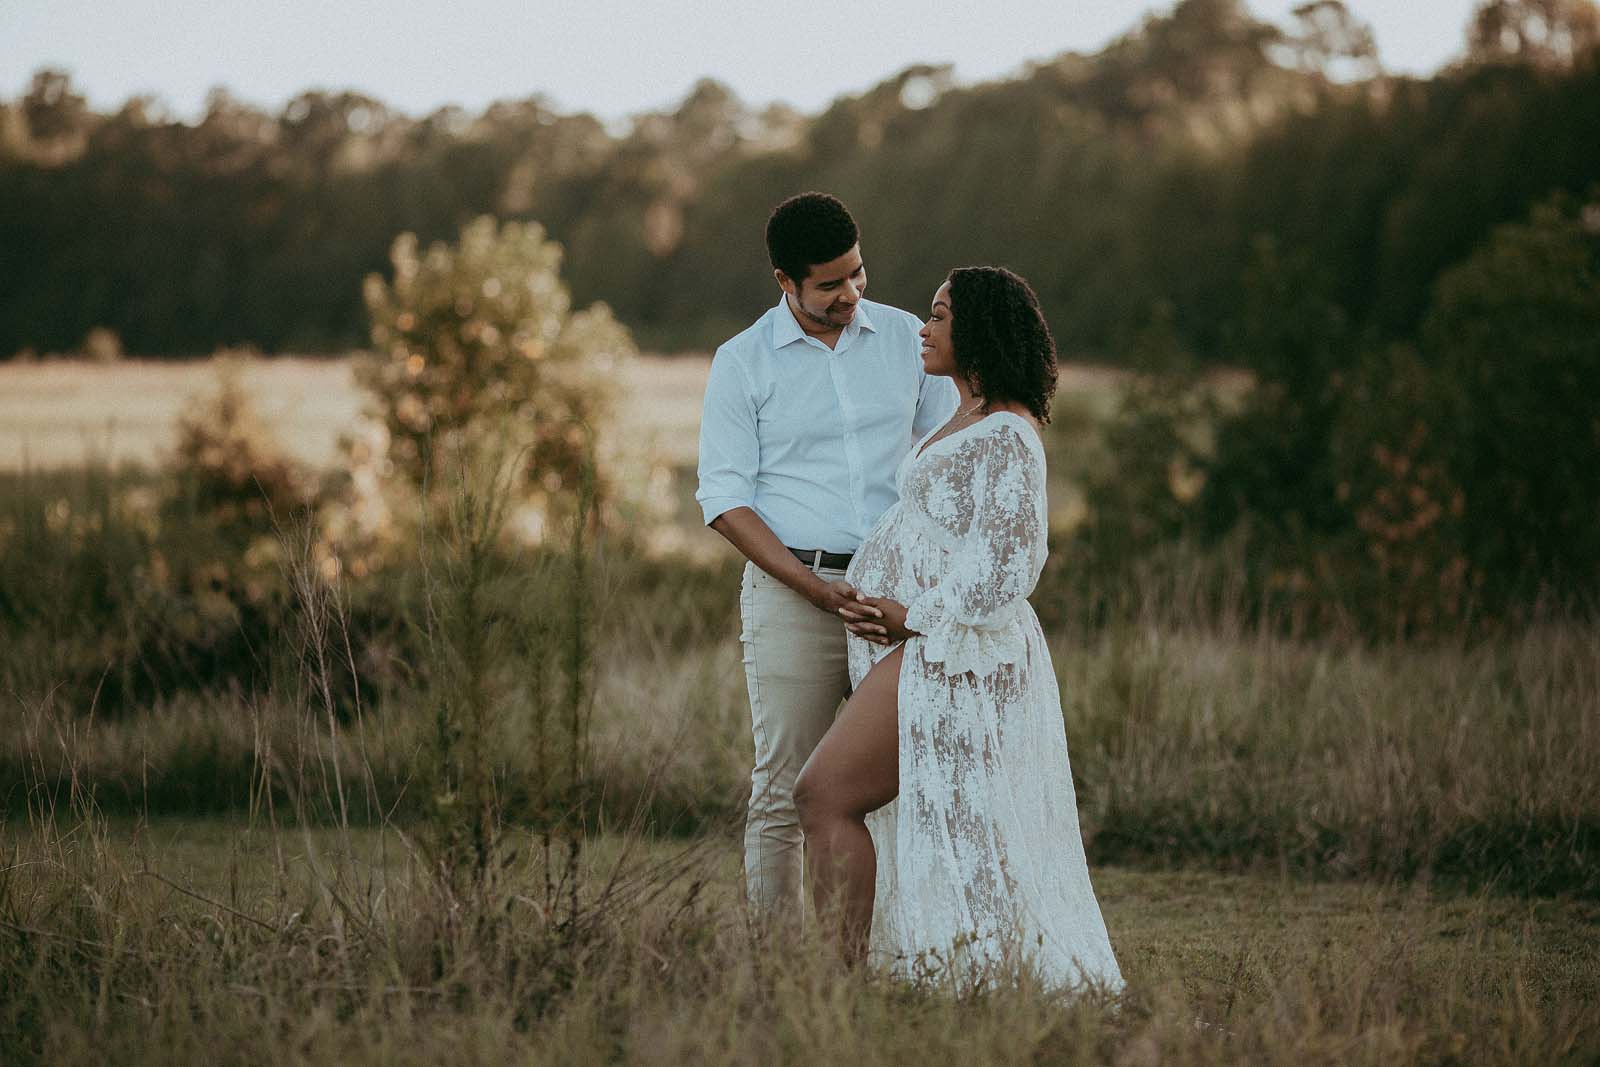 Dad-to-Be Embraces His Pregnant Wife in Maternity Photos. This photo shows a dad-to-be hugging his pregnant wife from her right side. They are both wearing white, and the photo is full of love and support. The photo is a beautiful reminder of the bond between a husband and wife, and the love they share for their unborn child. Maternity photographer - Victoria Vasilyeva Photography.